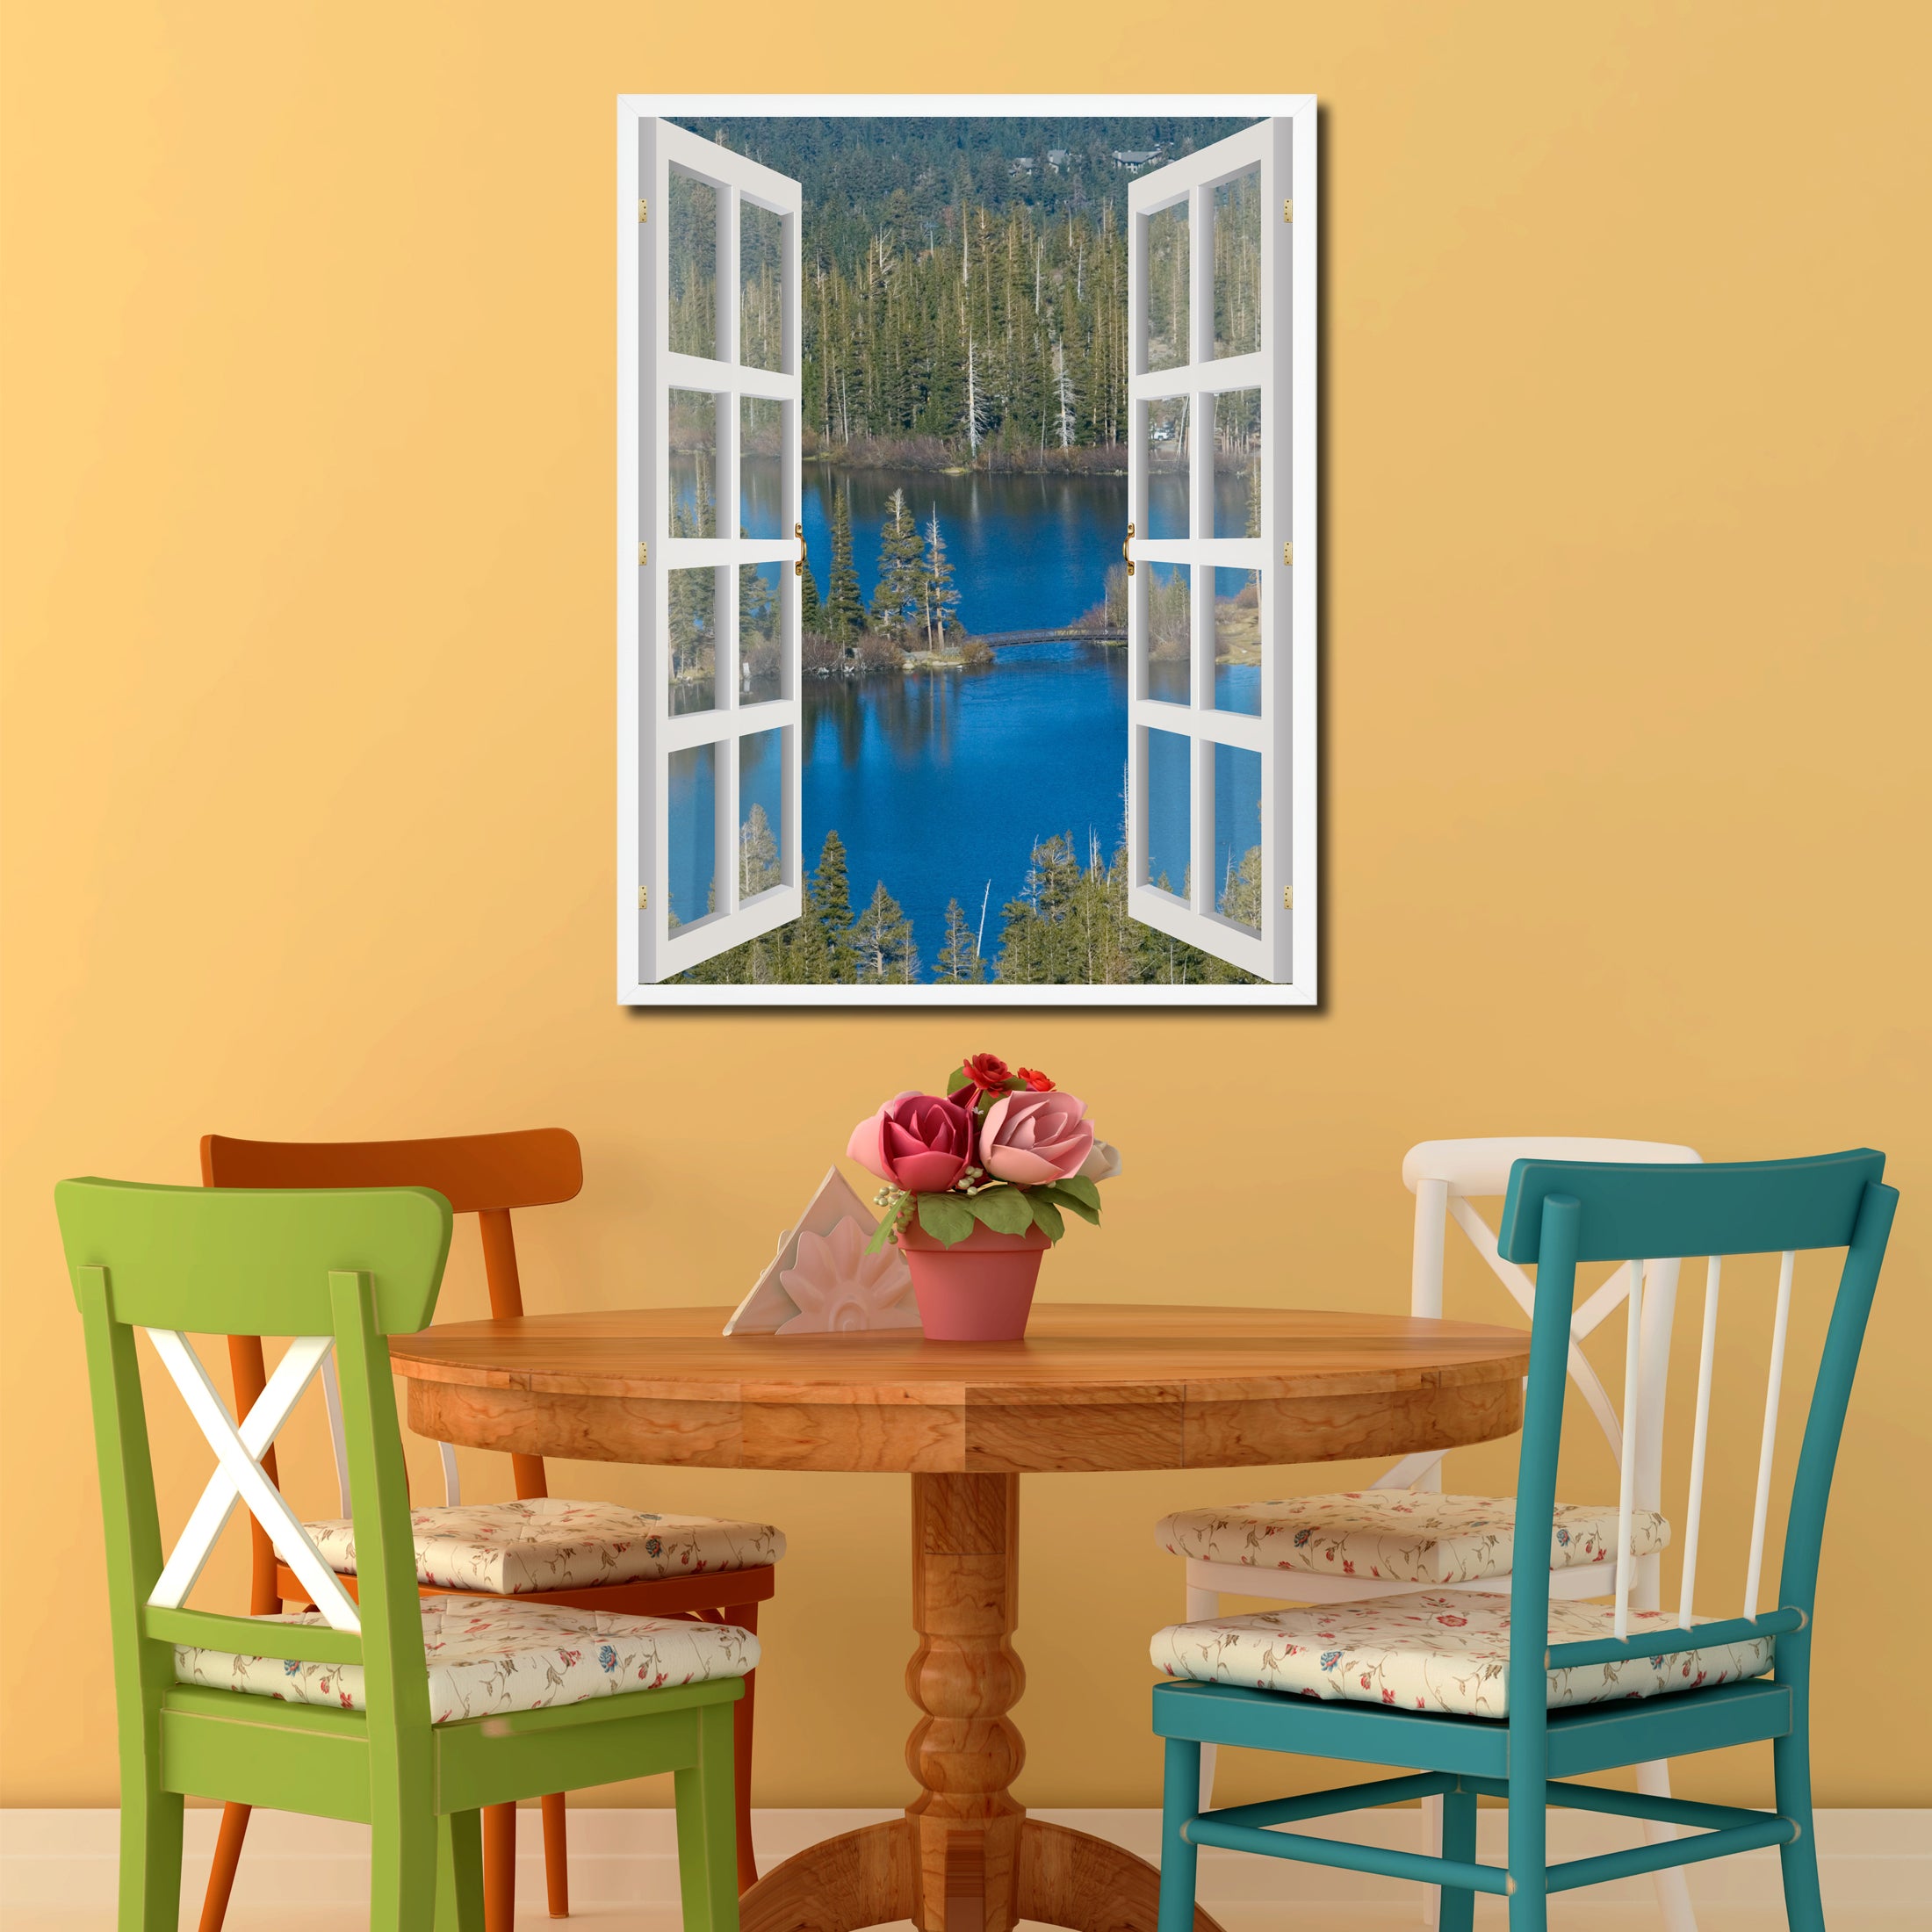 Twin Lakes Mammoth California Picture French Window Canvas Print with Frame Gifts Home Decor Wall Art Collection